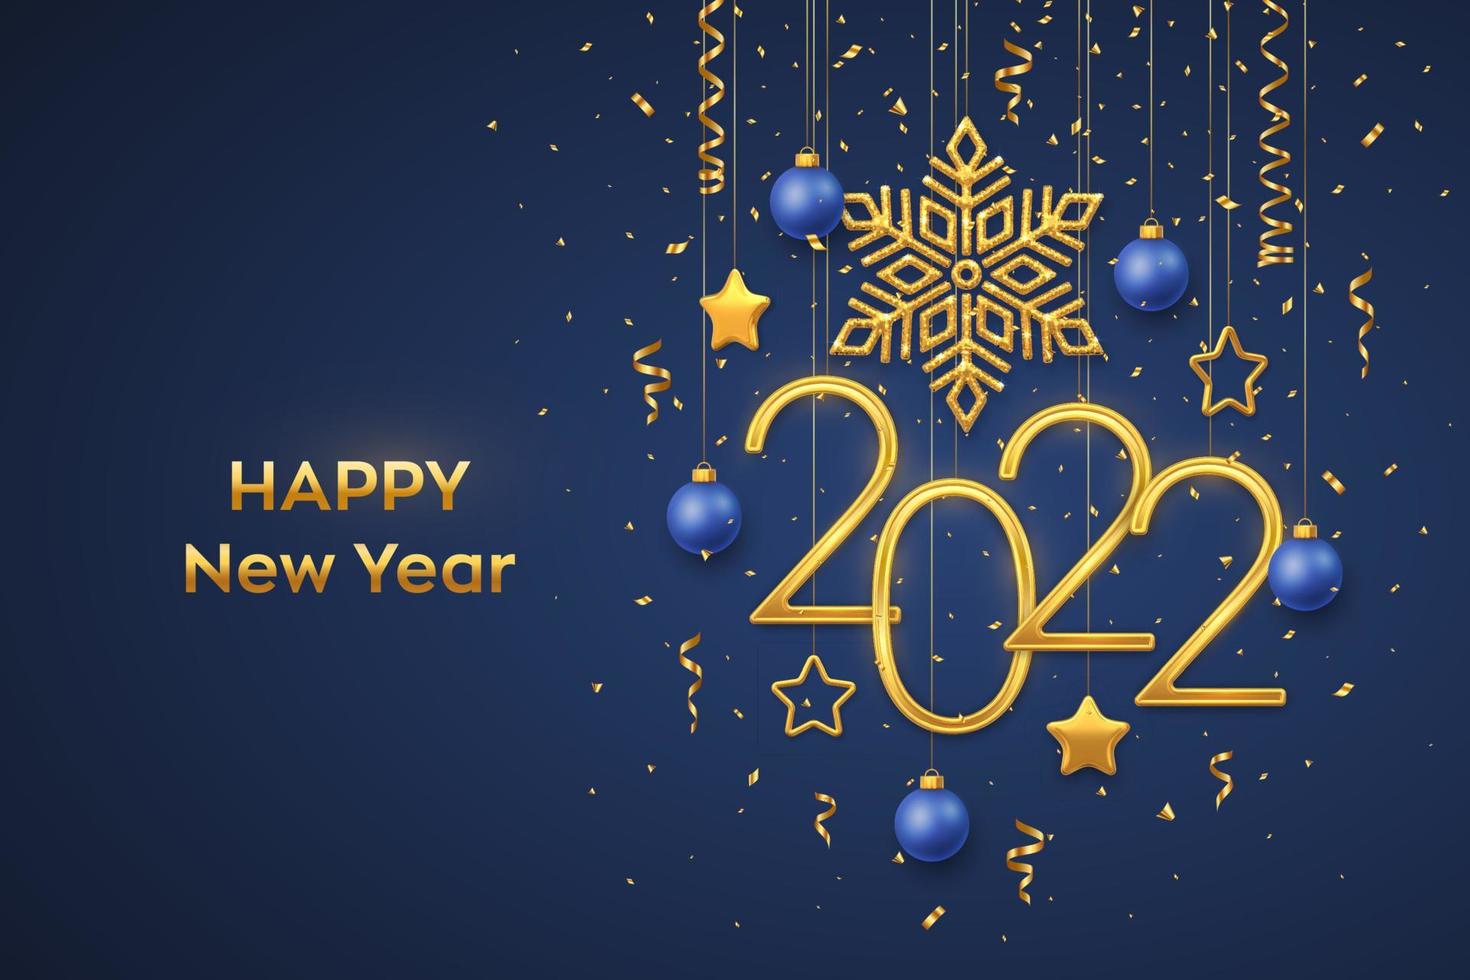 Happy New 2022 Year. Hanging Golden metallic numbers 2022 with shining snowflake, 3D metallic stars, balls and confetti on blue background. New Year greeting card or banner template. Vector. vector